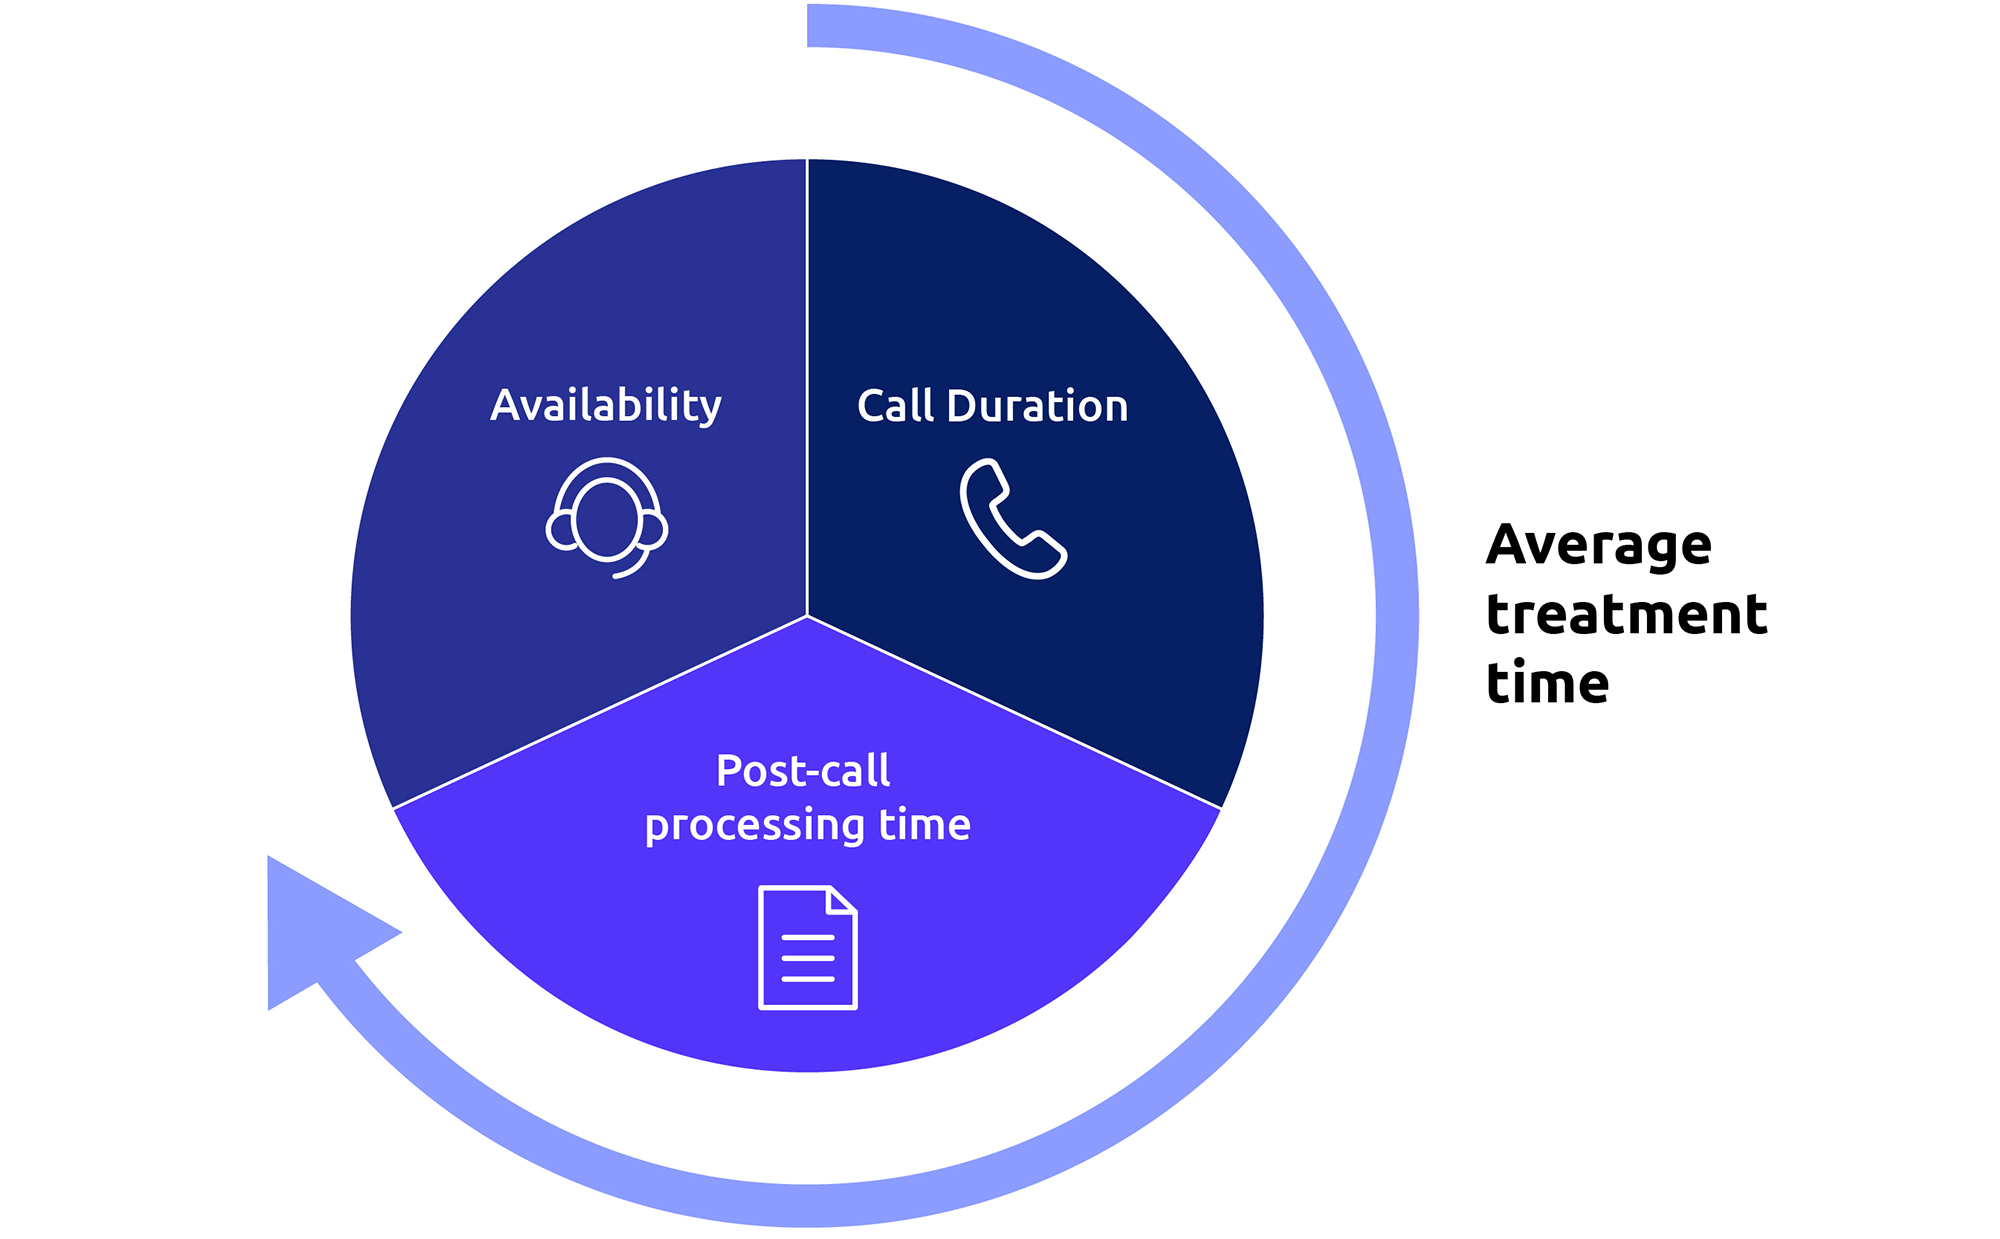 How to calculate average treatment time in call centers